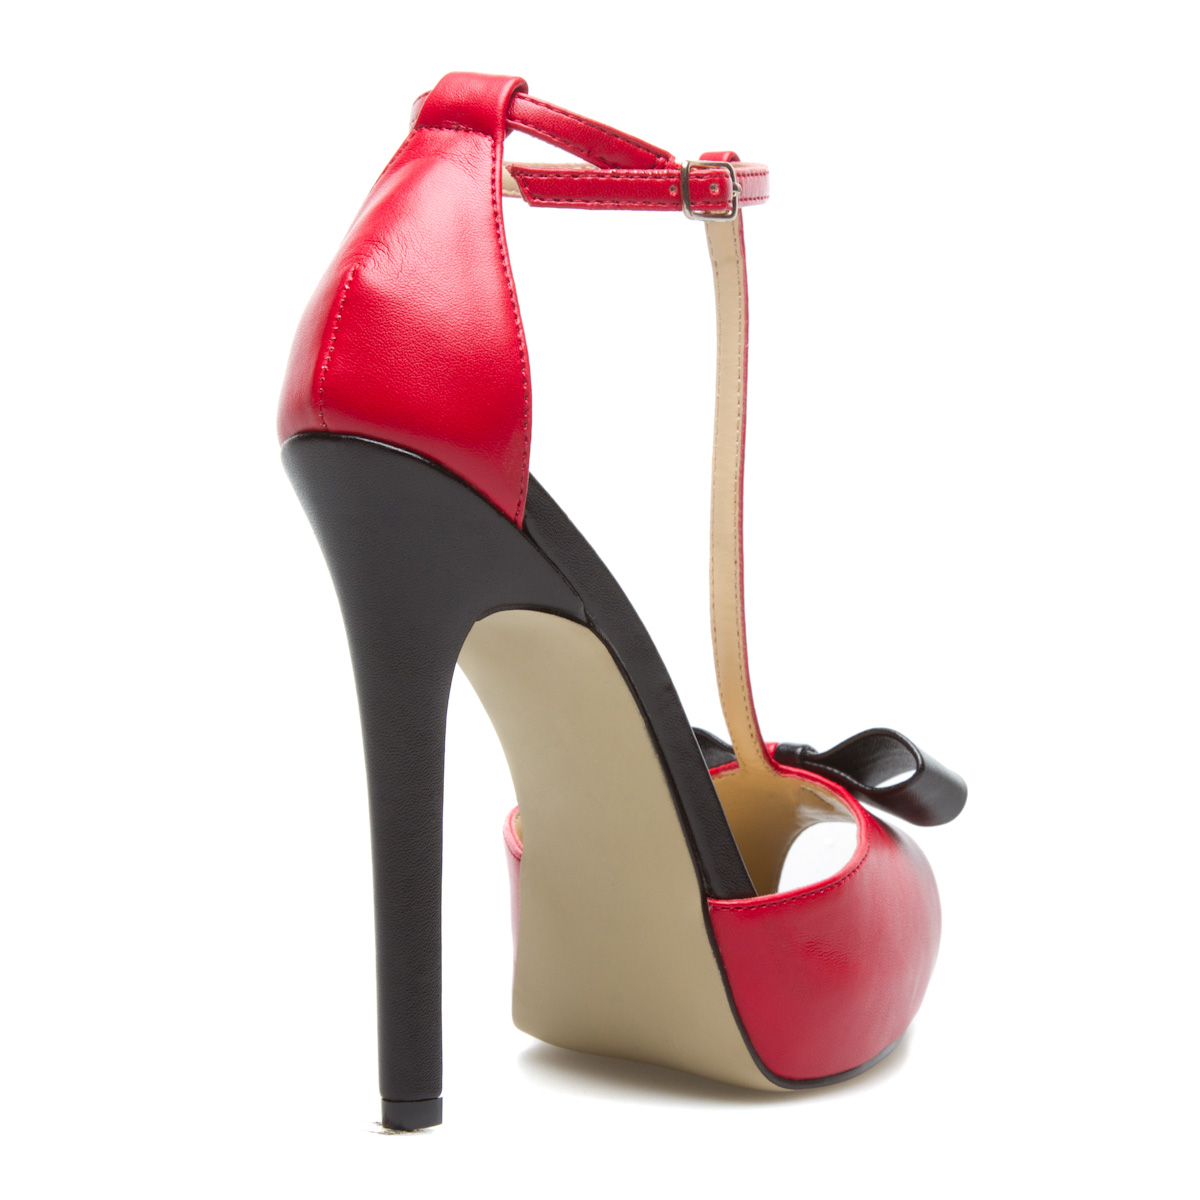 Stacey - ShoeDazzle